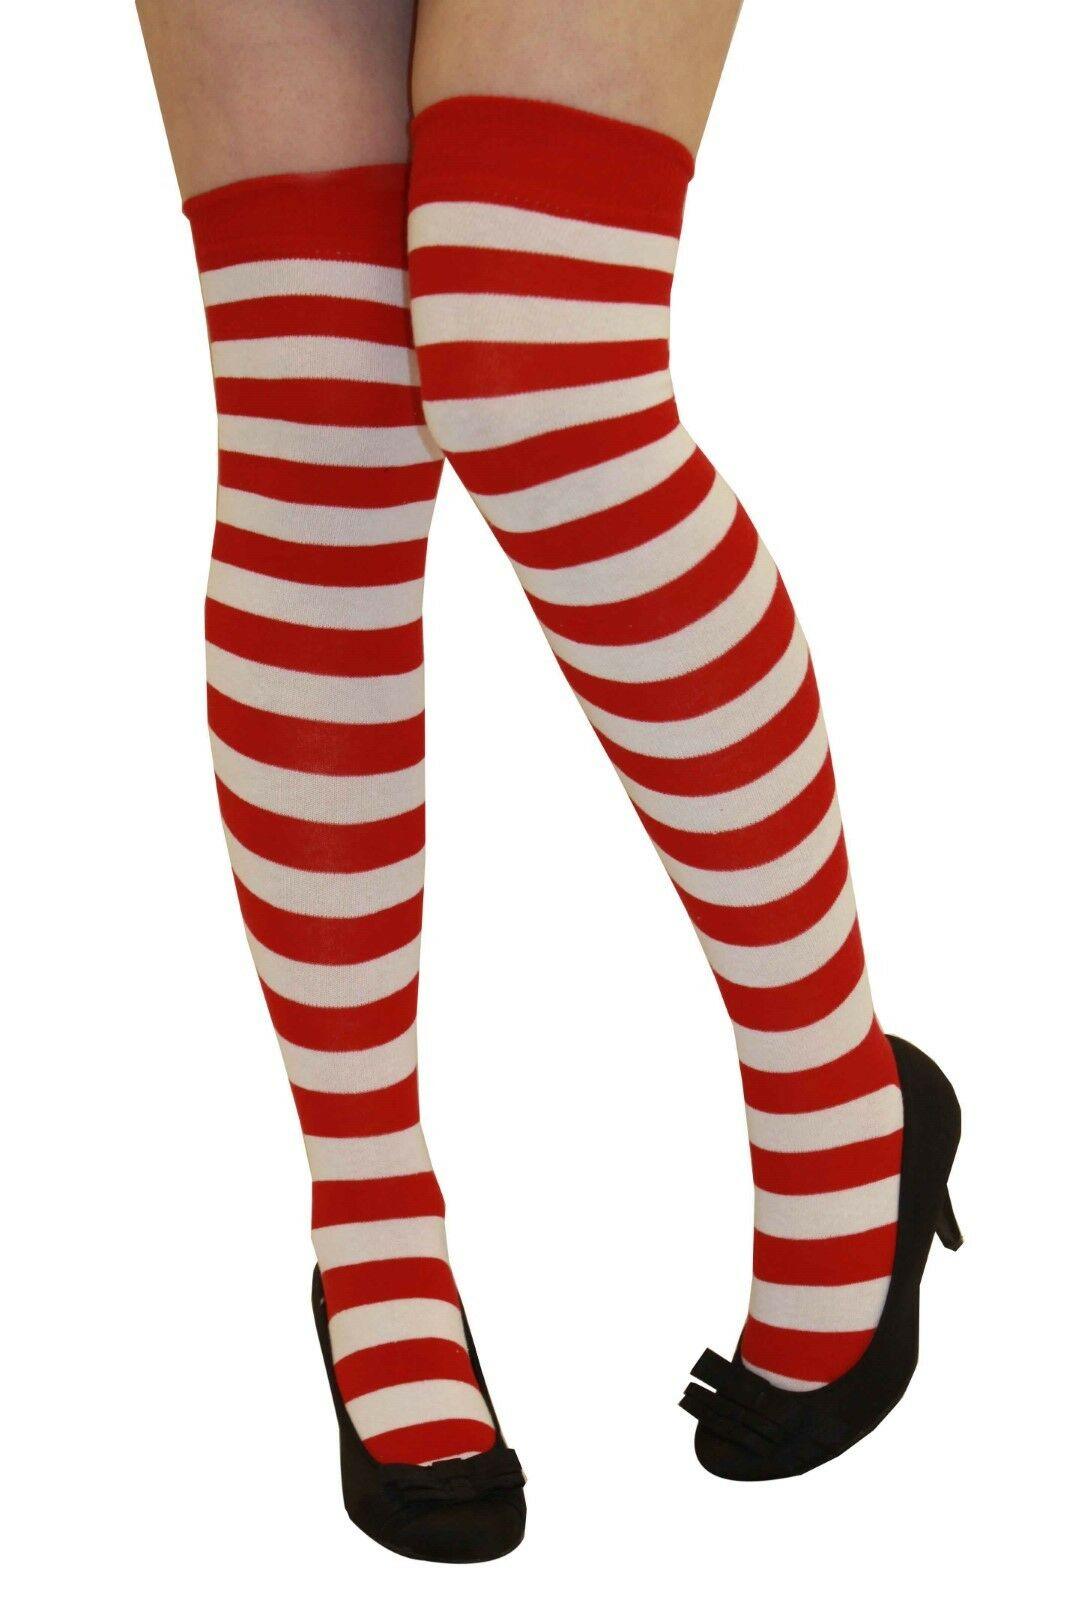 Ladies Red White Thigh High Girls Stretchy Over the Knee Socks - Labreeze